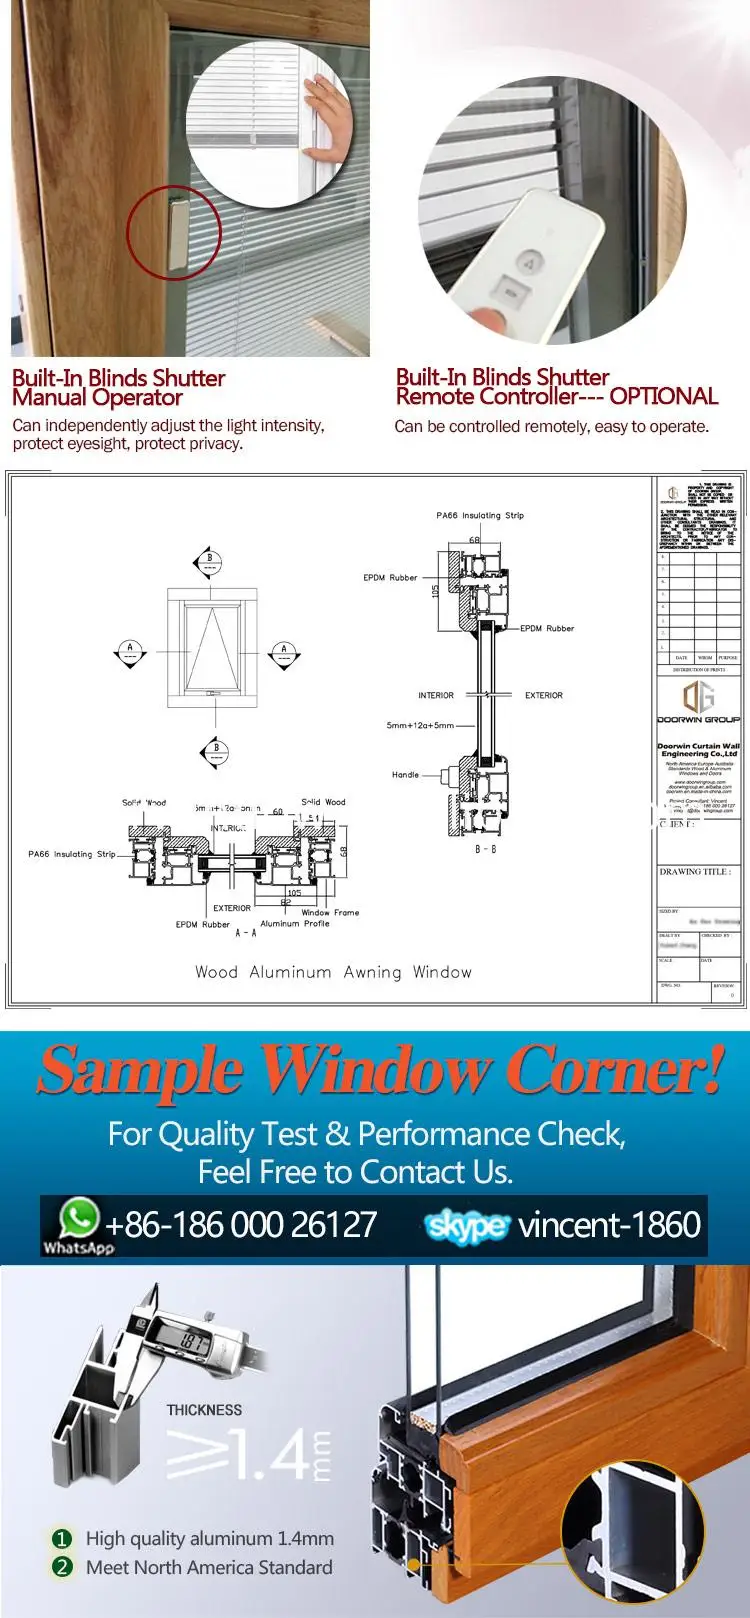 Aluminum awning window with parts aluminum awning louvre blade